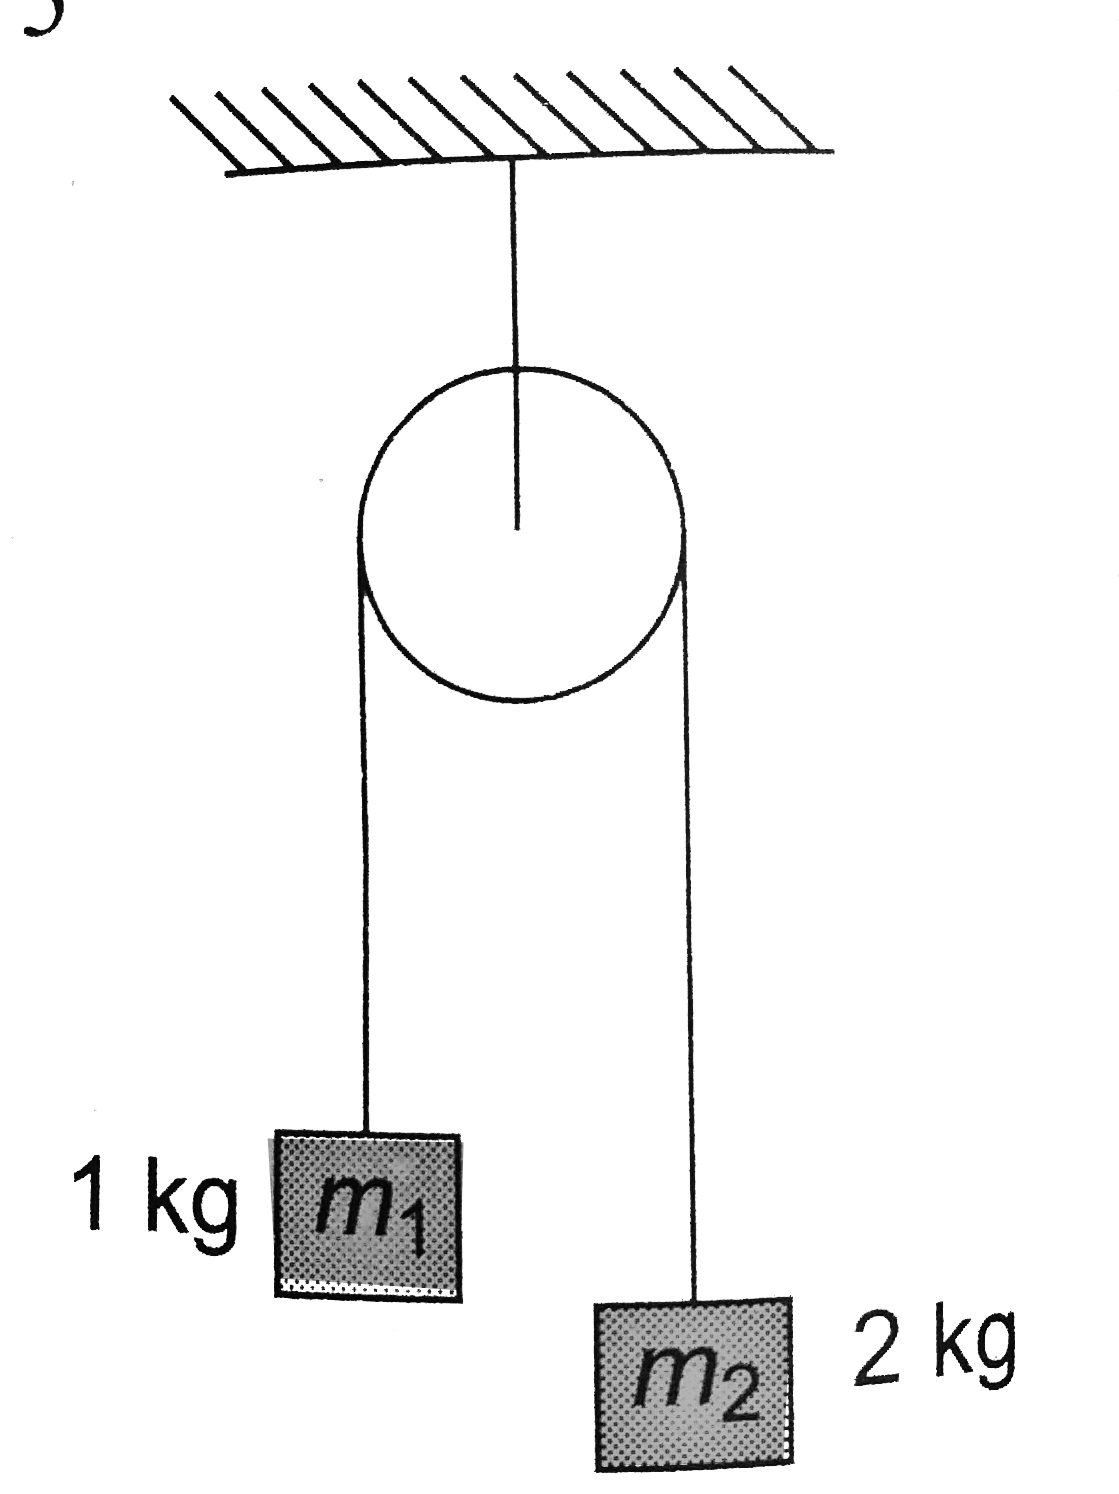 Two masses m1 = 1 kg and m2 = 2 kg are connected by a light inextensible string and suspended by means of a weightness pulley as shown in the figure. Assuming that both the masses start from rest, the distance travelled by the centre of mass in two seconds is (Take g = 10 ms^-2.   .